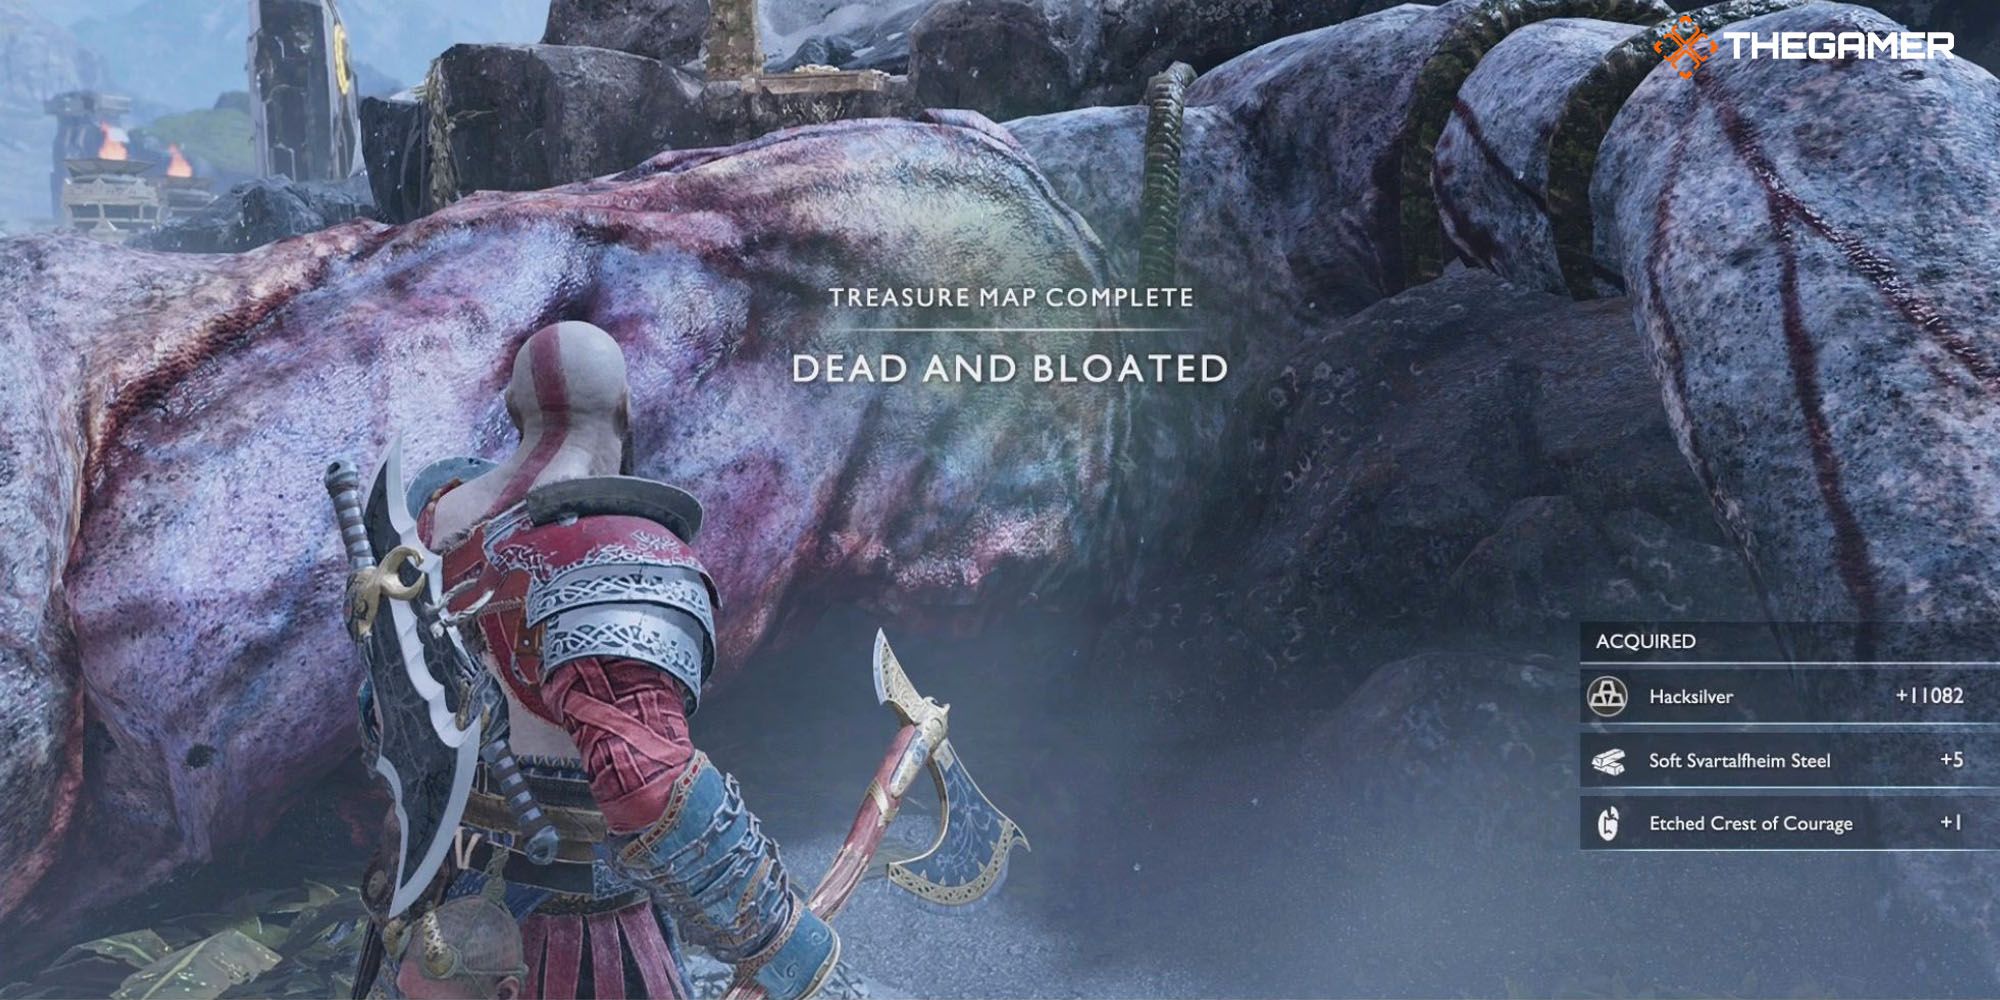 God of war dead and bloated treasure location